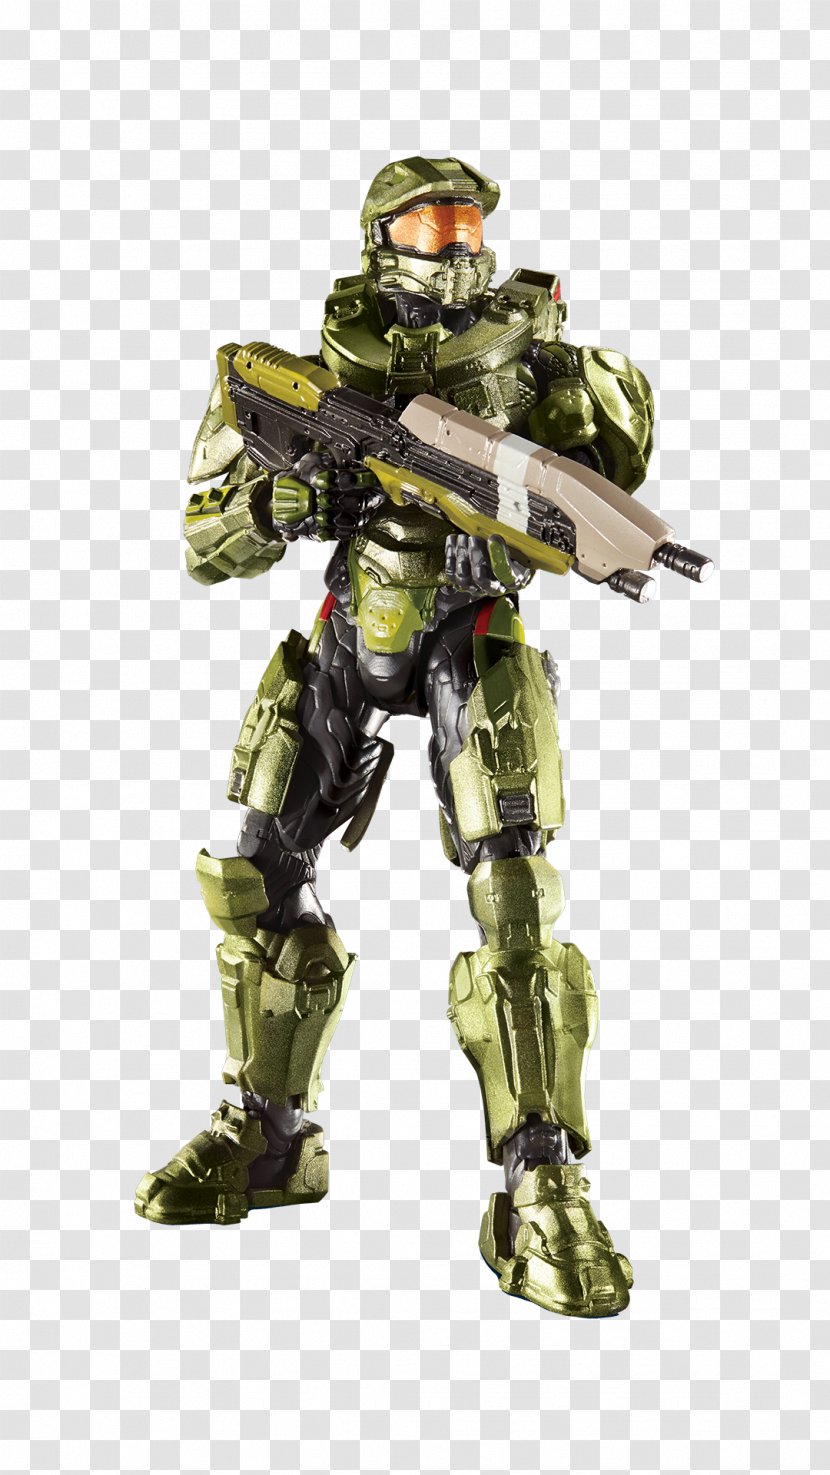 Halo: Combat Evolved The Master Chief Collection Halo 2 Cortana - Action Toy Figures Transparent PNG